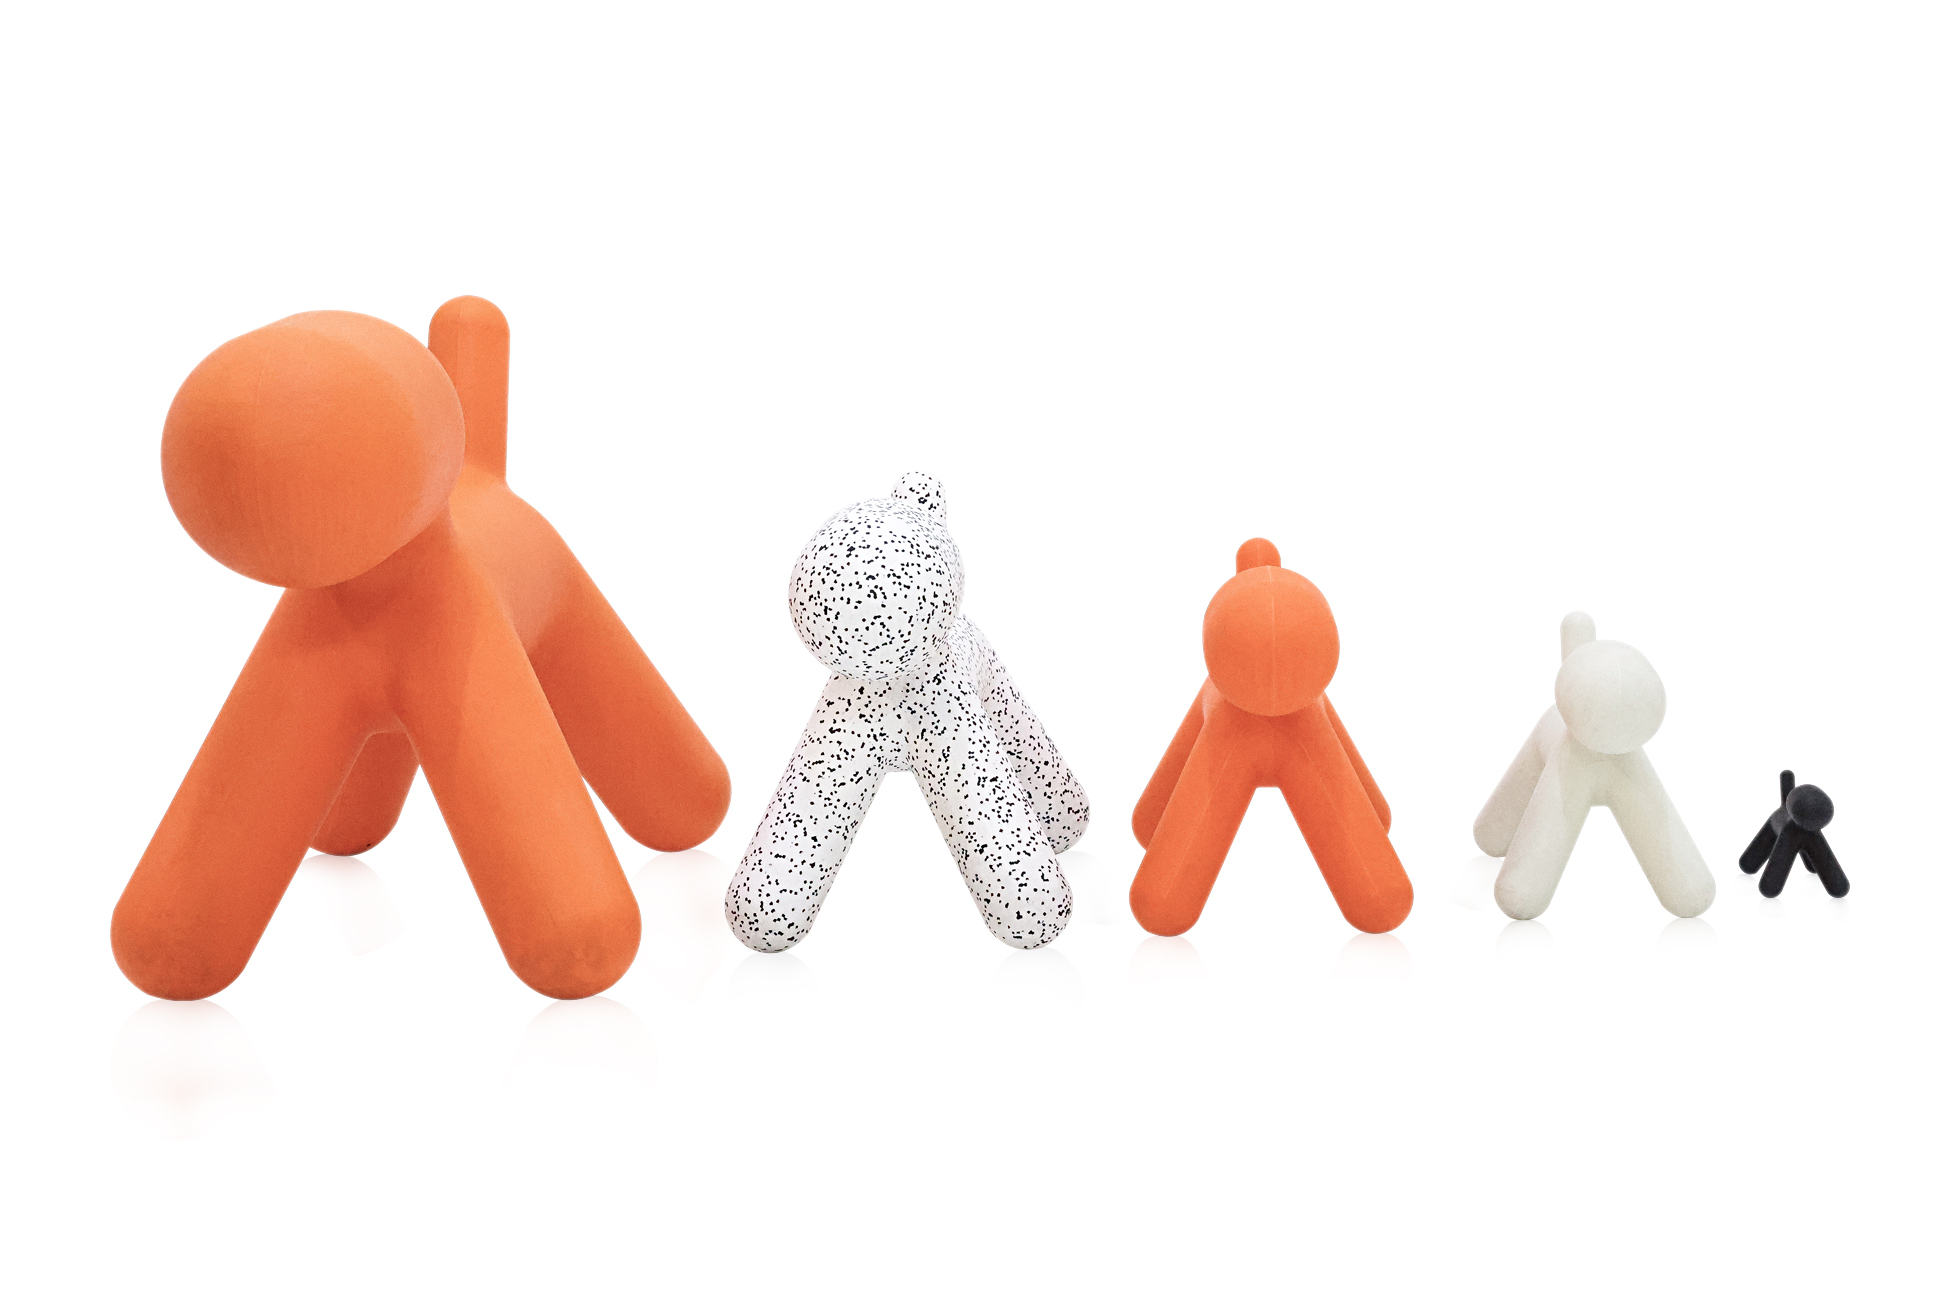 A GROUP OF FIVE MAGIS "ME TOO" PUPPY SCULPTURES